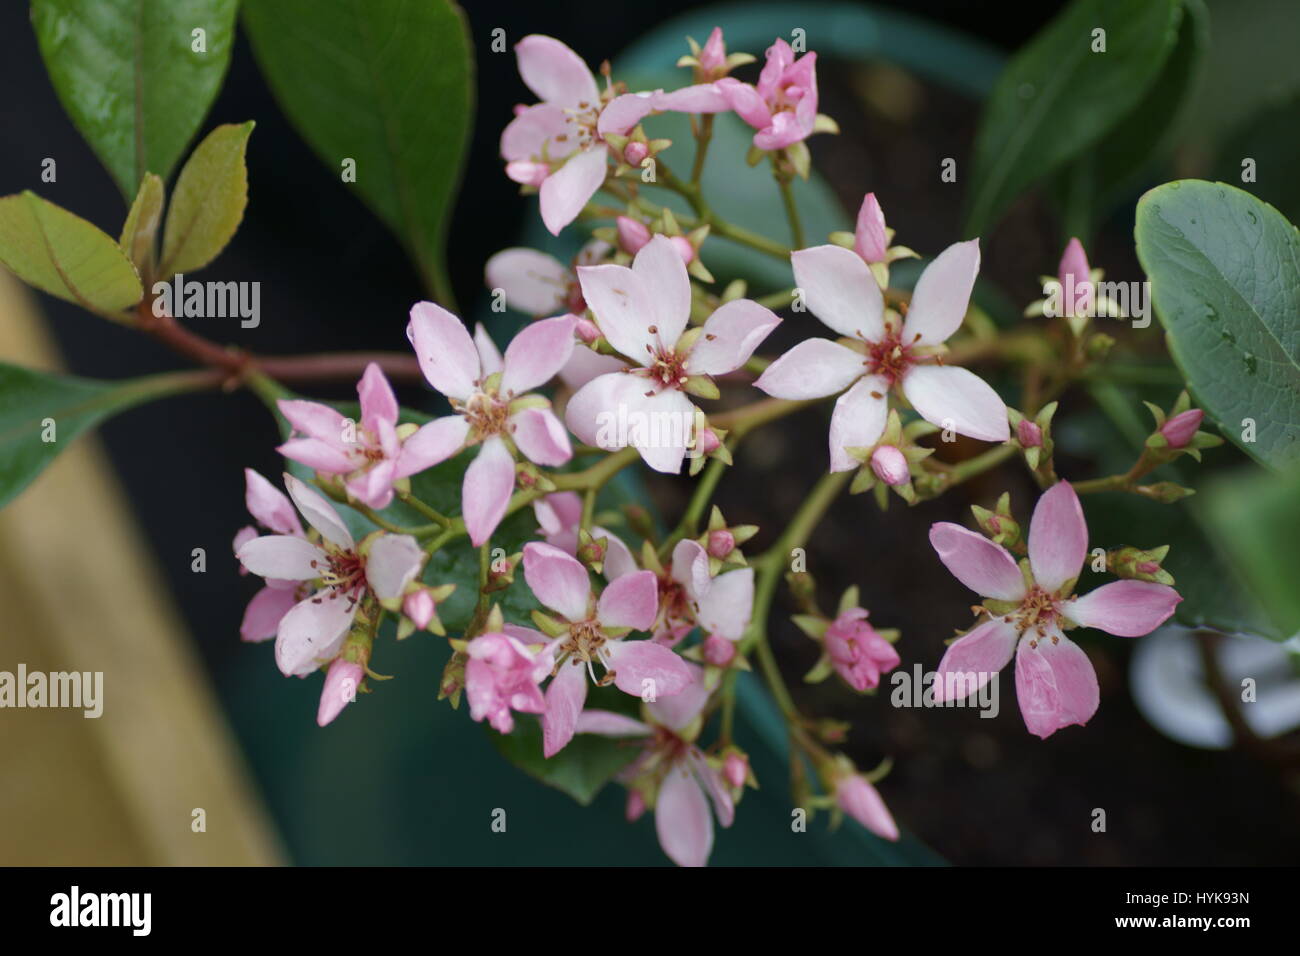 Rhaphiolepis delacourii 'Pink Cloud' Stock Photo